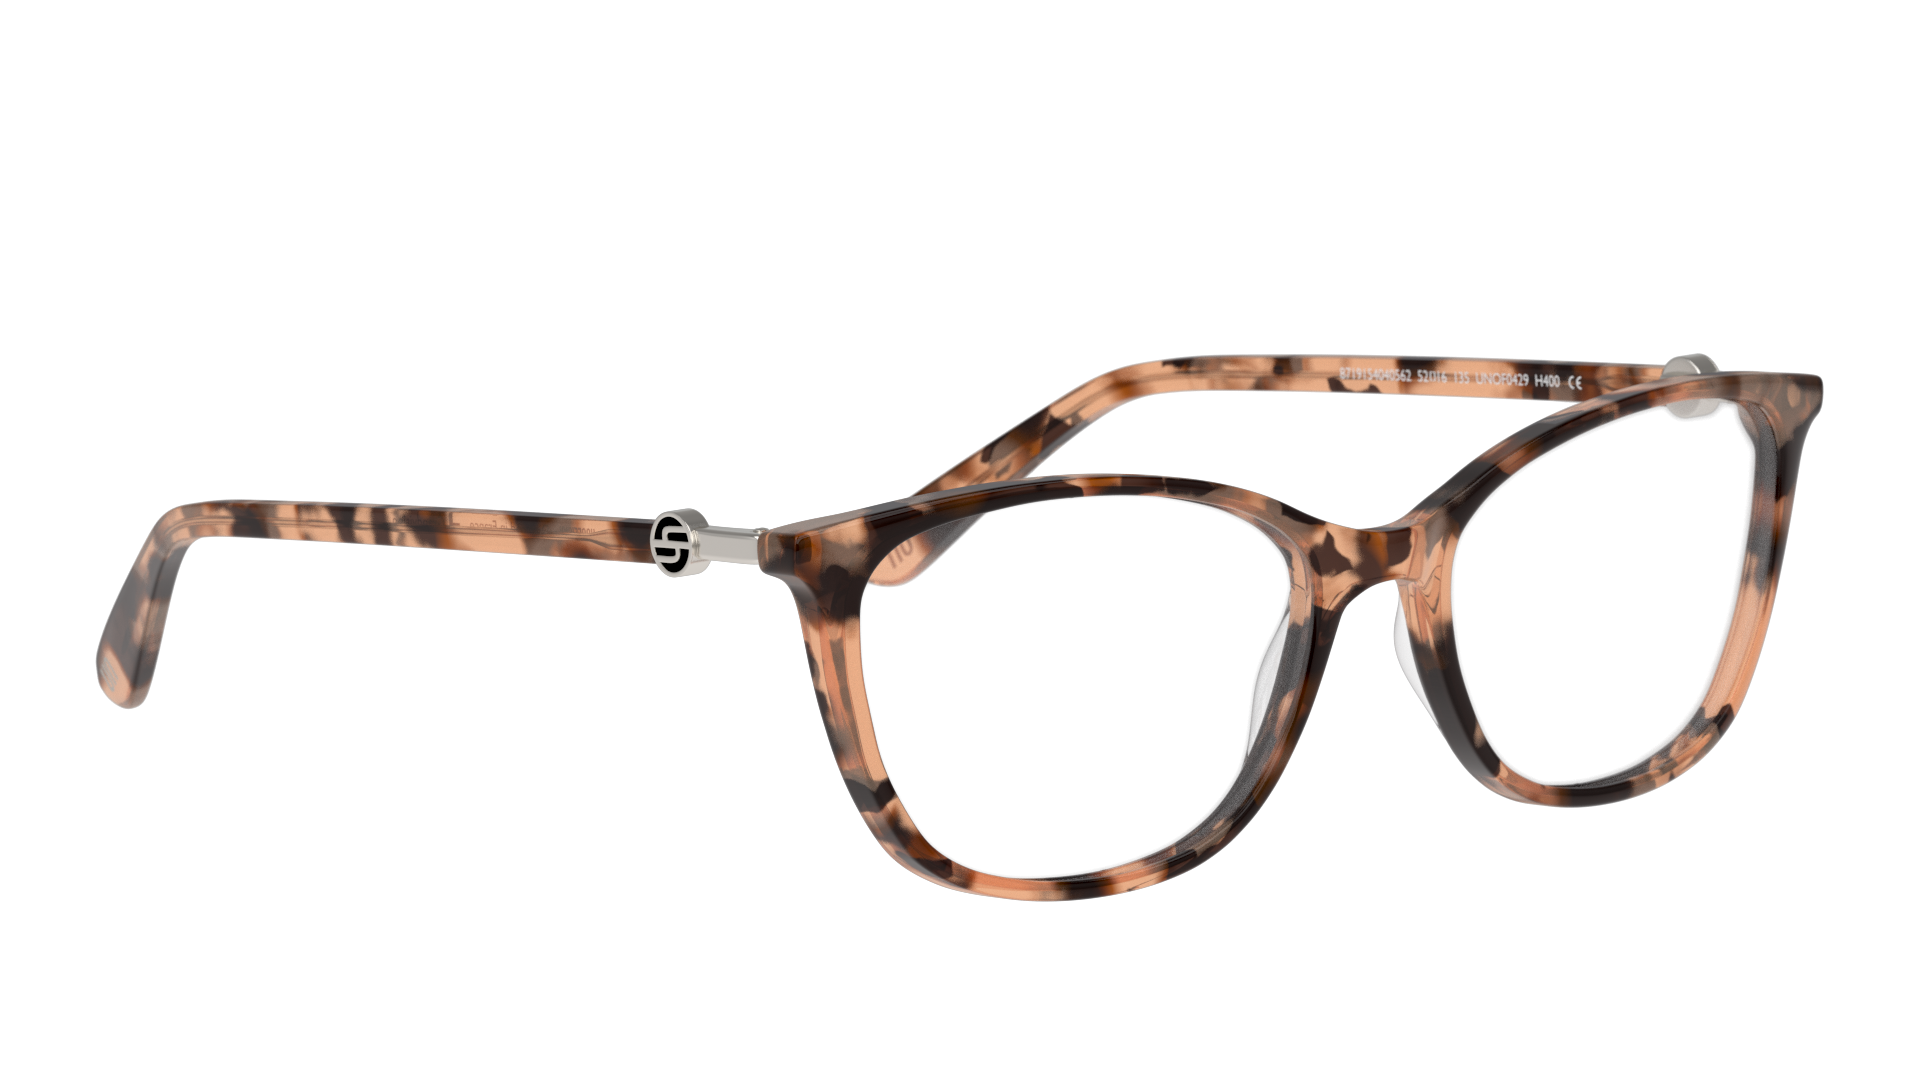 Angle_Right01 Unofficial UNOF0429 (HH00) Glasses Transparent / Tortoise Shell